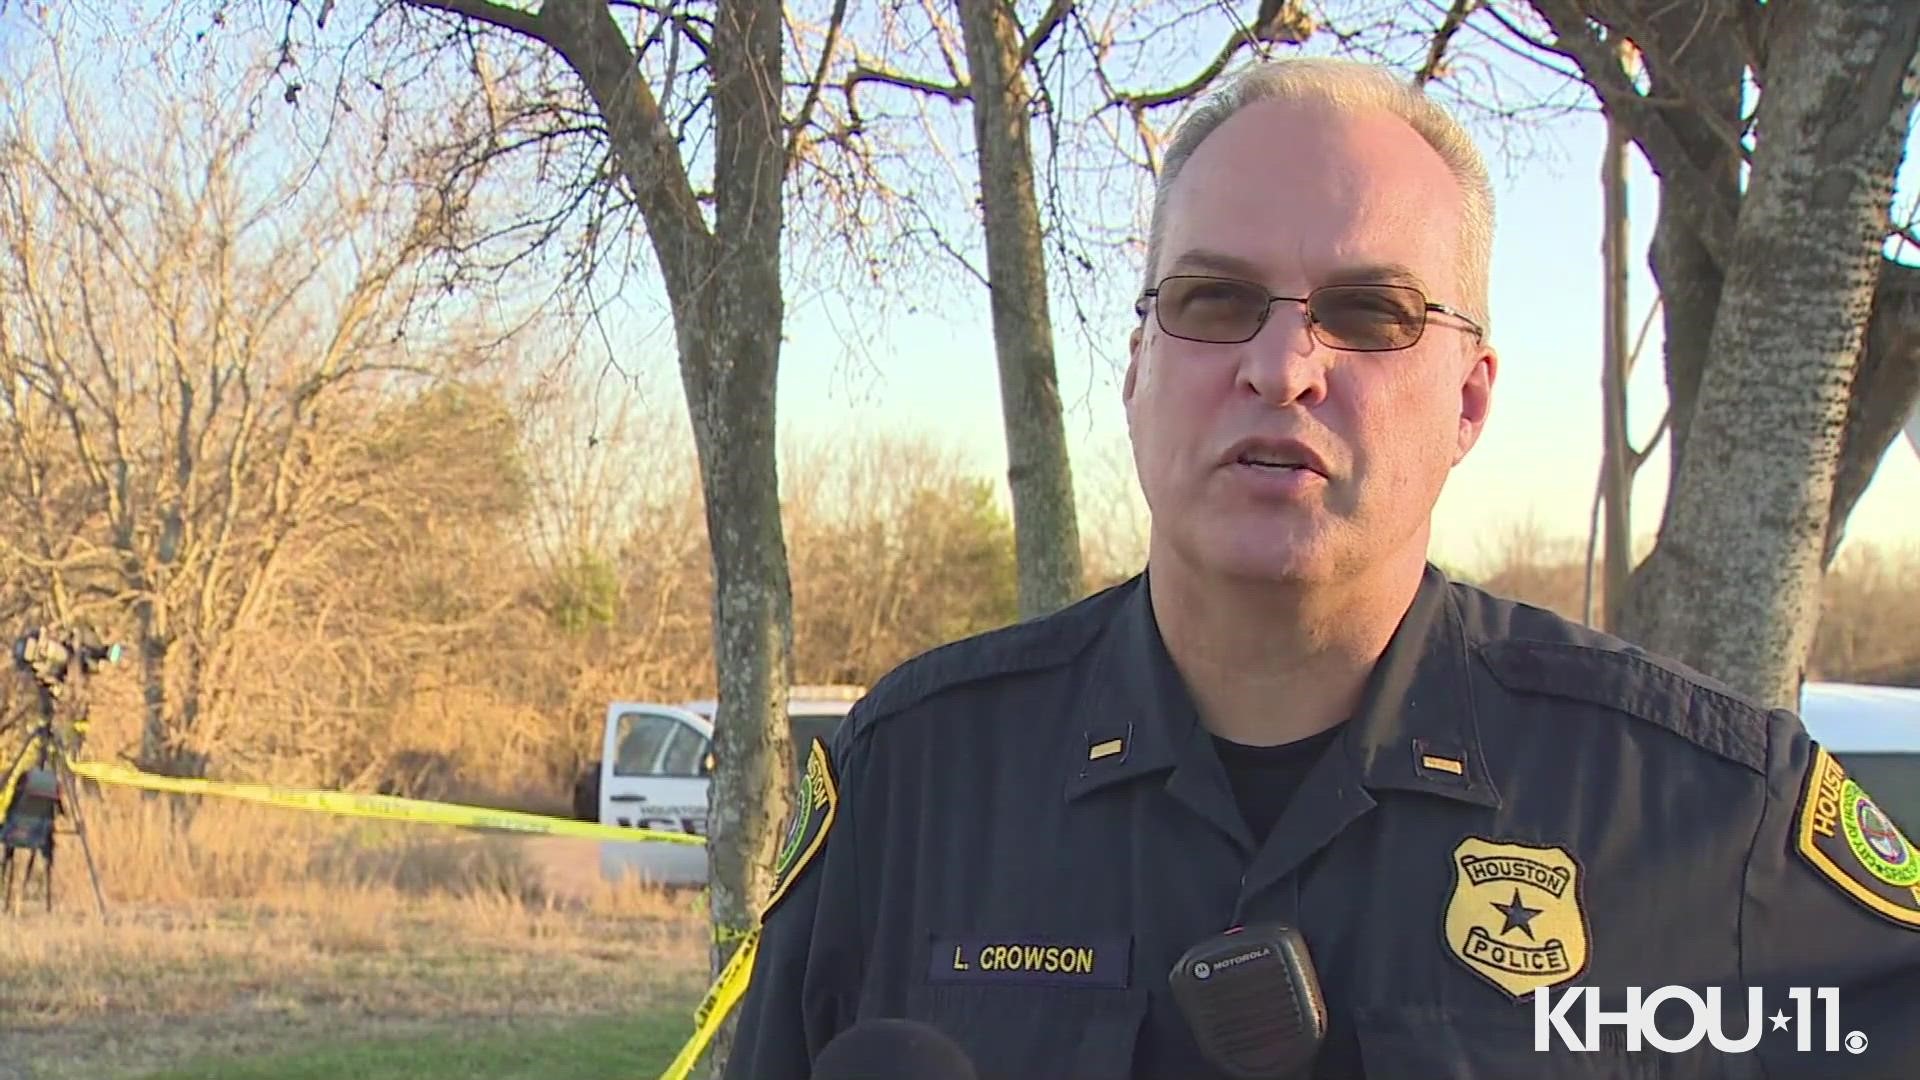 Lt. Larry Crowson spoke about the shooting Wednesday that investigators say was likely a case of road rage.